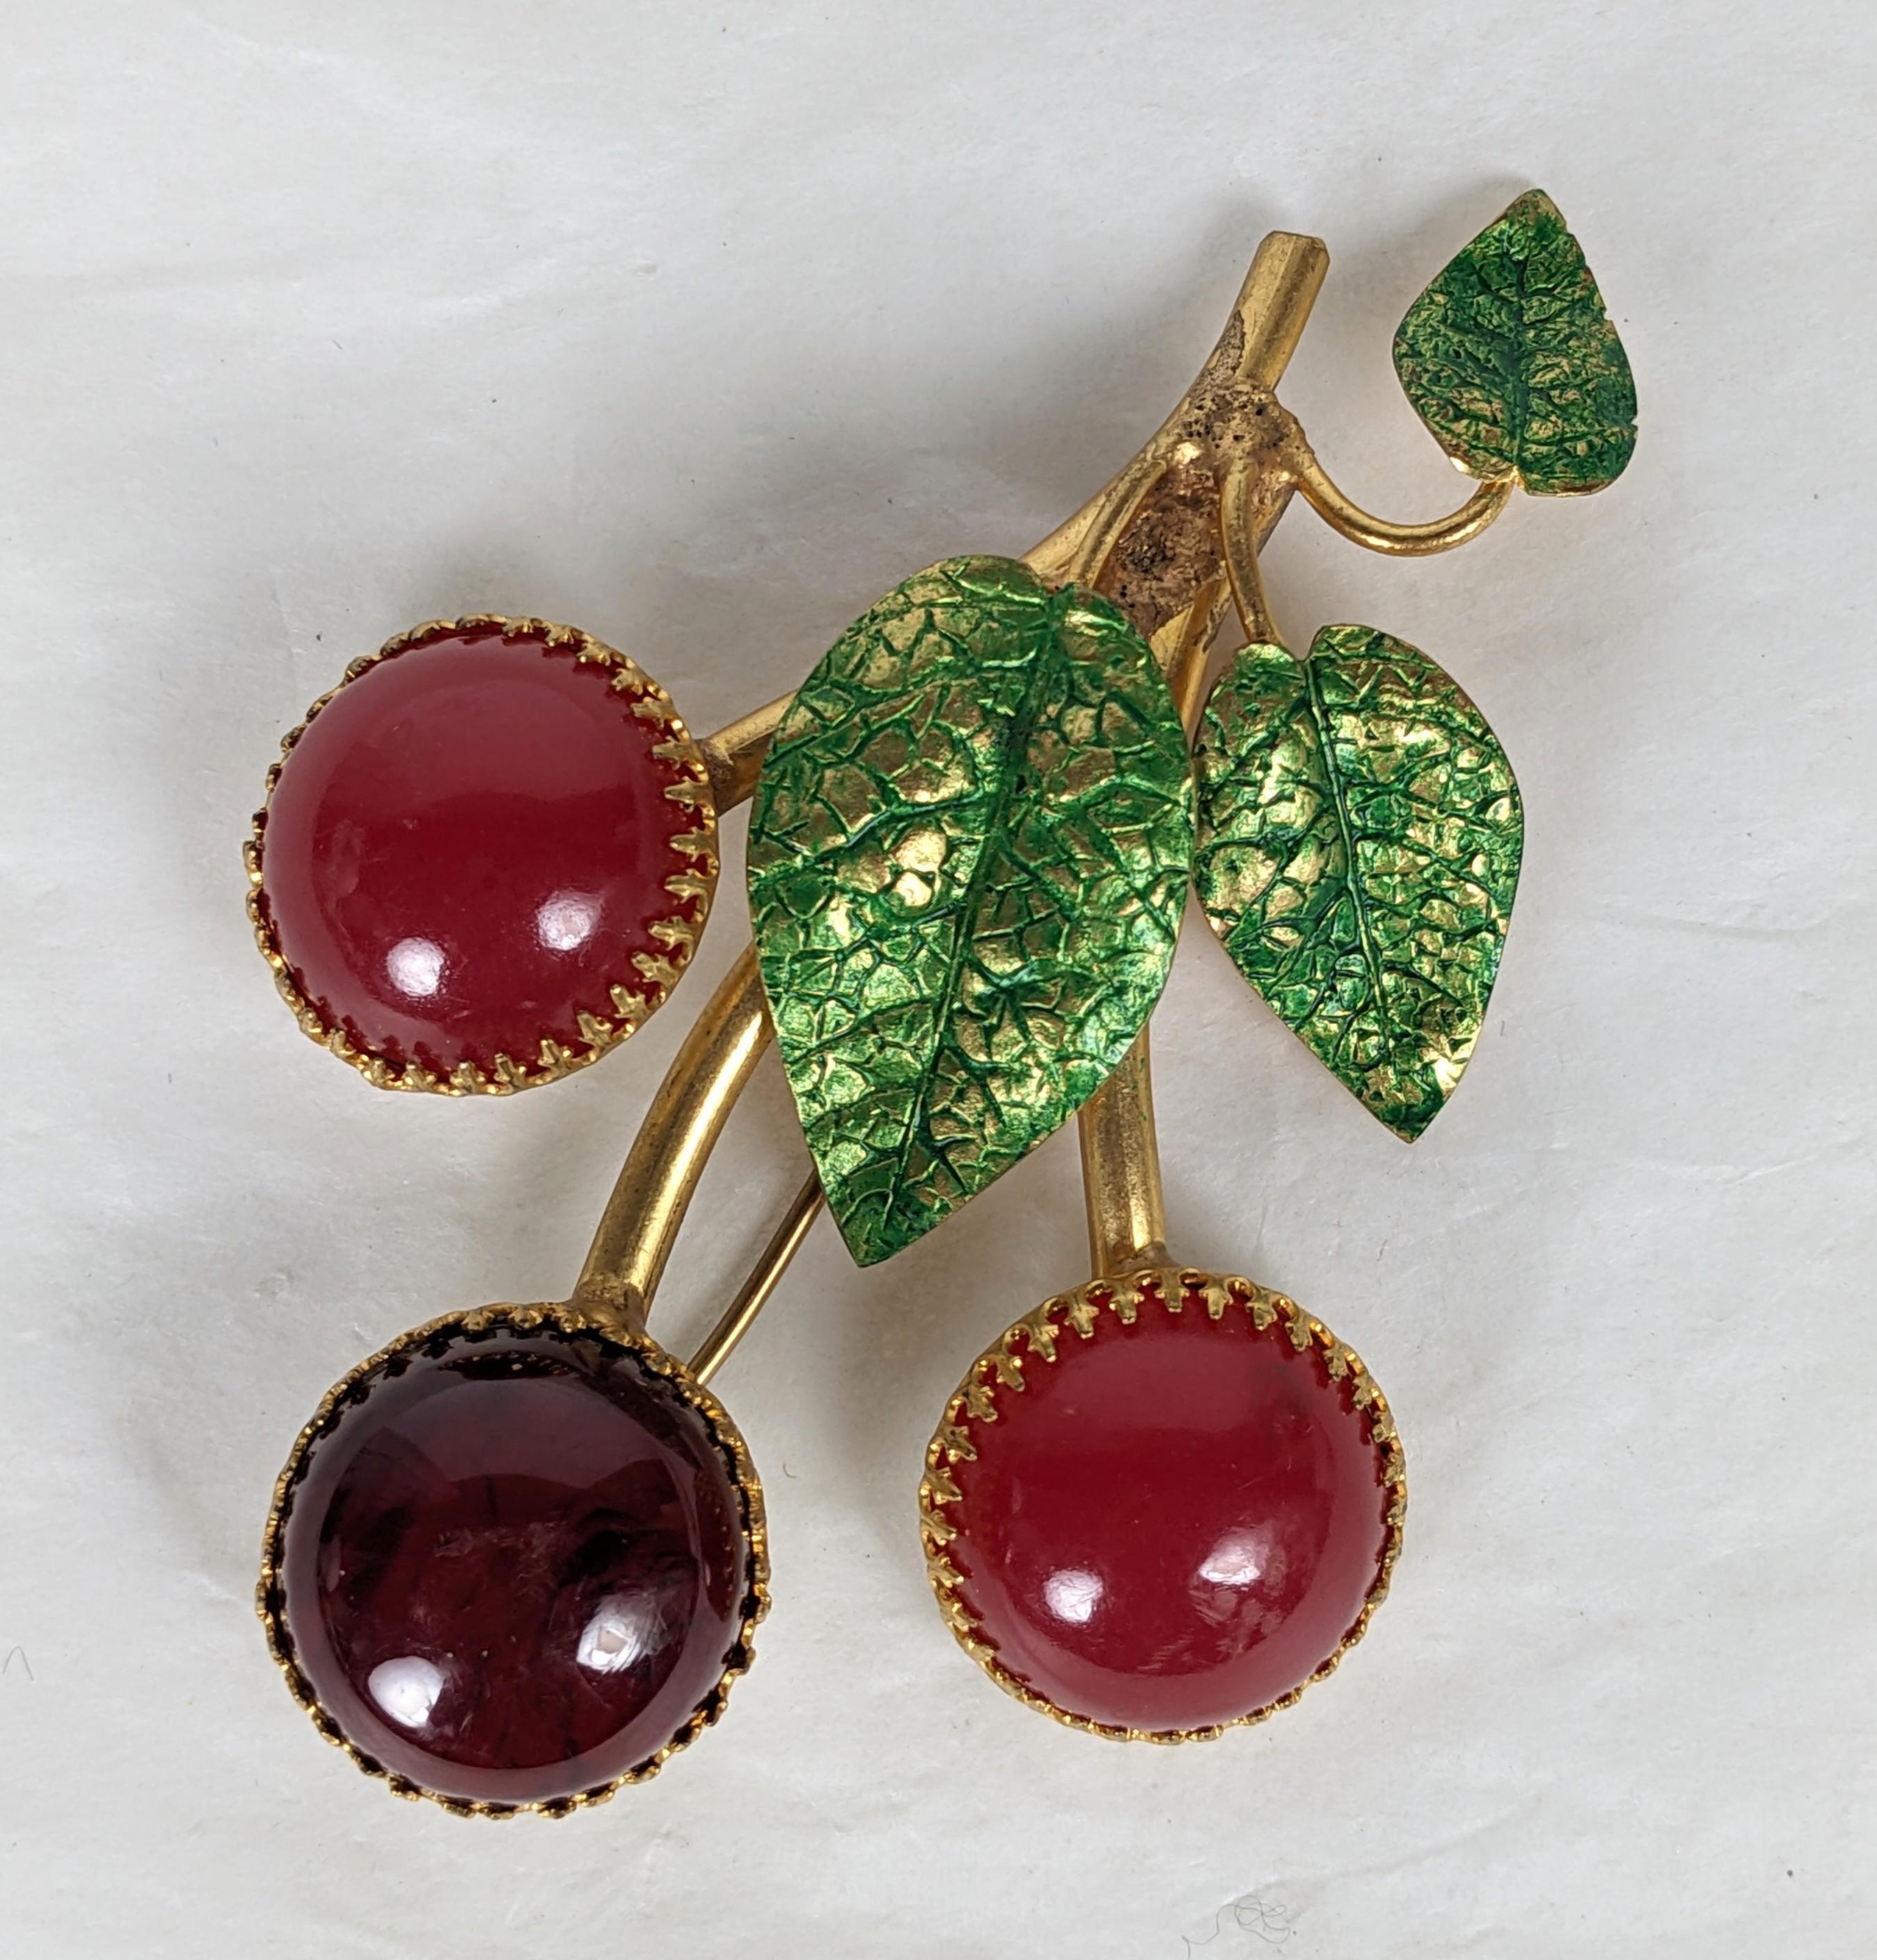 Rare Countess Cis Bakelite Cherry Brooch from the 1960's. Designed with a bakelite cherries with hand enamel leaves set into gilt bronze filigree settings. Unsigned but recognized as a Countess Cis design. French closure. 1960's France. 3